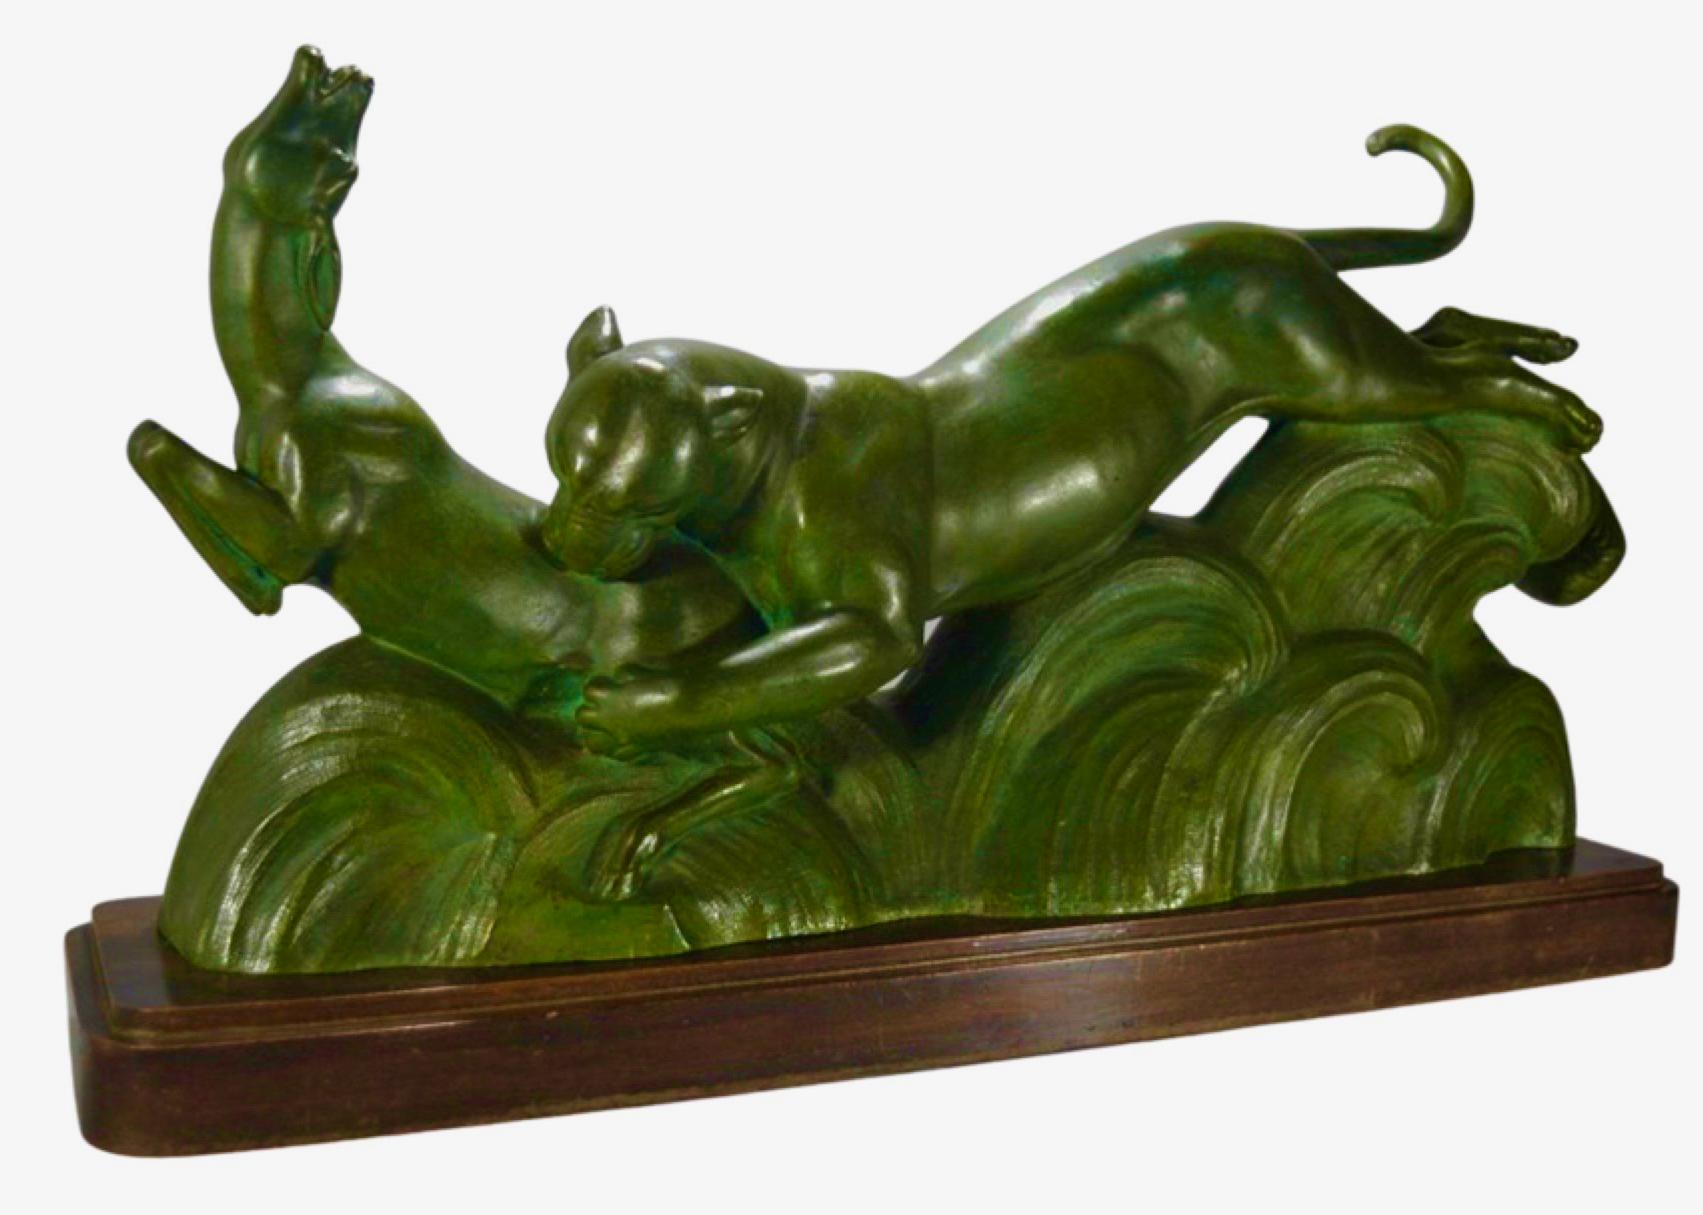 Art Deco French bronze sculpture of panther and gazelle by Alexander Ouline portrays animals in action, a kind of abstract forest floor in bronze all mounted on a wooden base. Ouline was a Belgian artist, working in France from 1918- 1940, famous